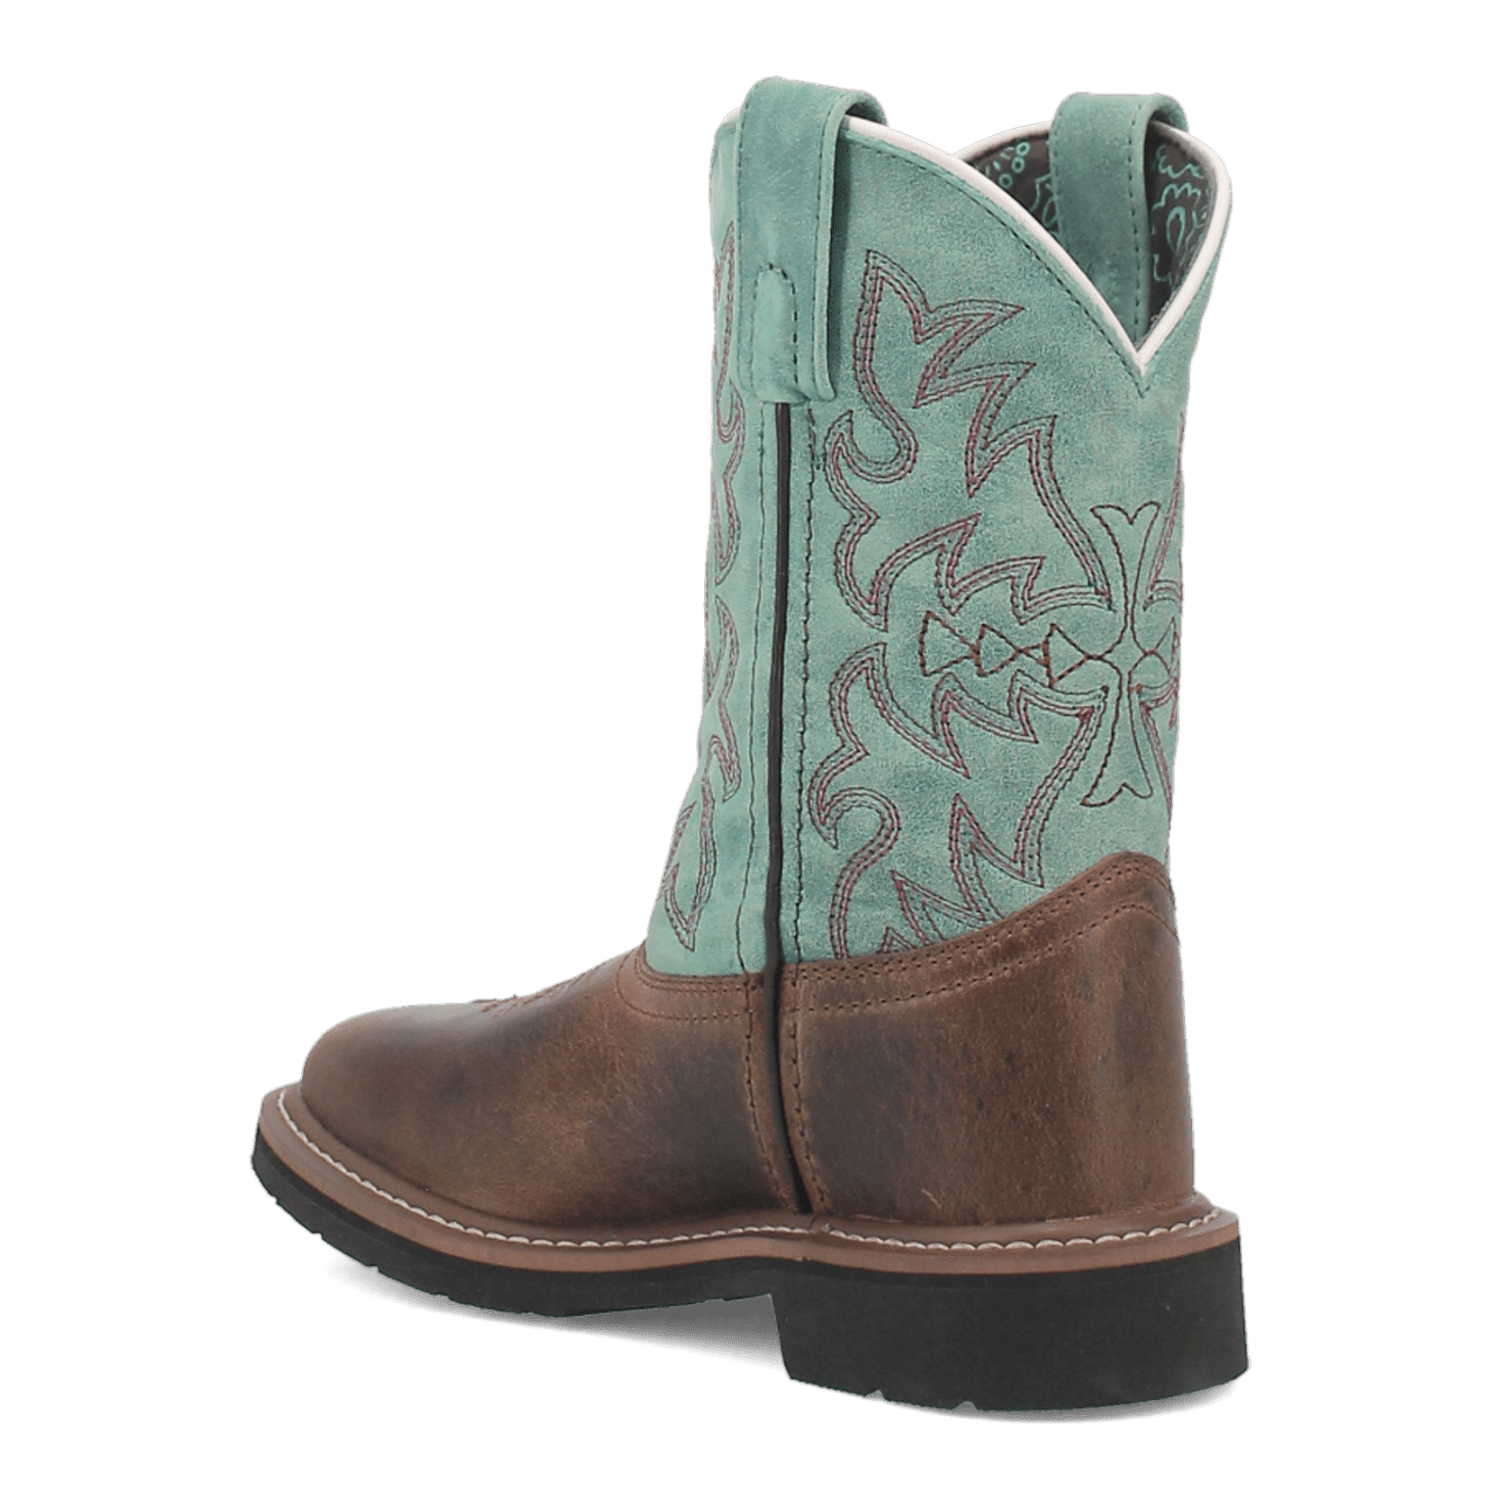 NIA LEATHER CHILDREN'S BOOT Image